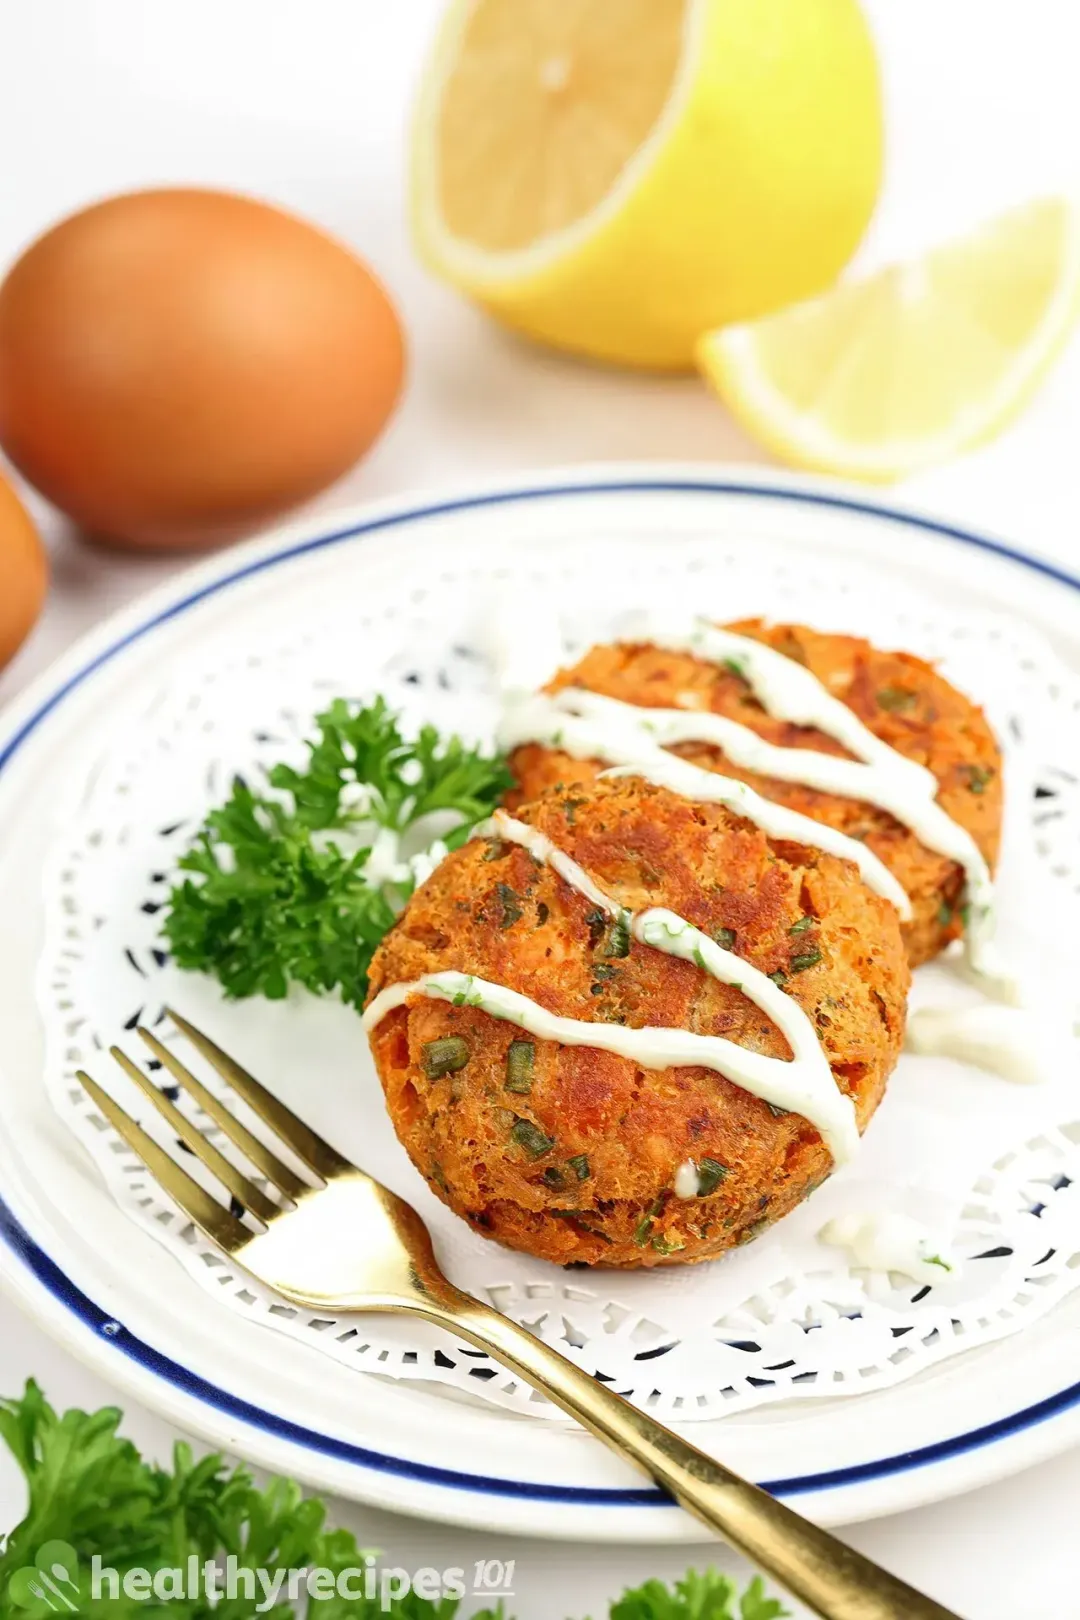 A picture of a plate with two fried salmon patties drizzled with yogurt sauce and garnished with fresh parsley. There are some eggs and lemons blurred in the background.